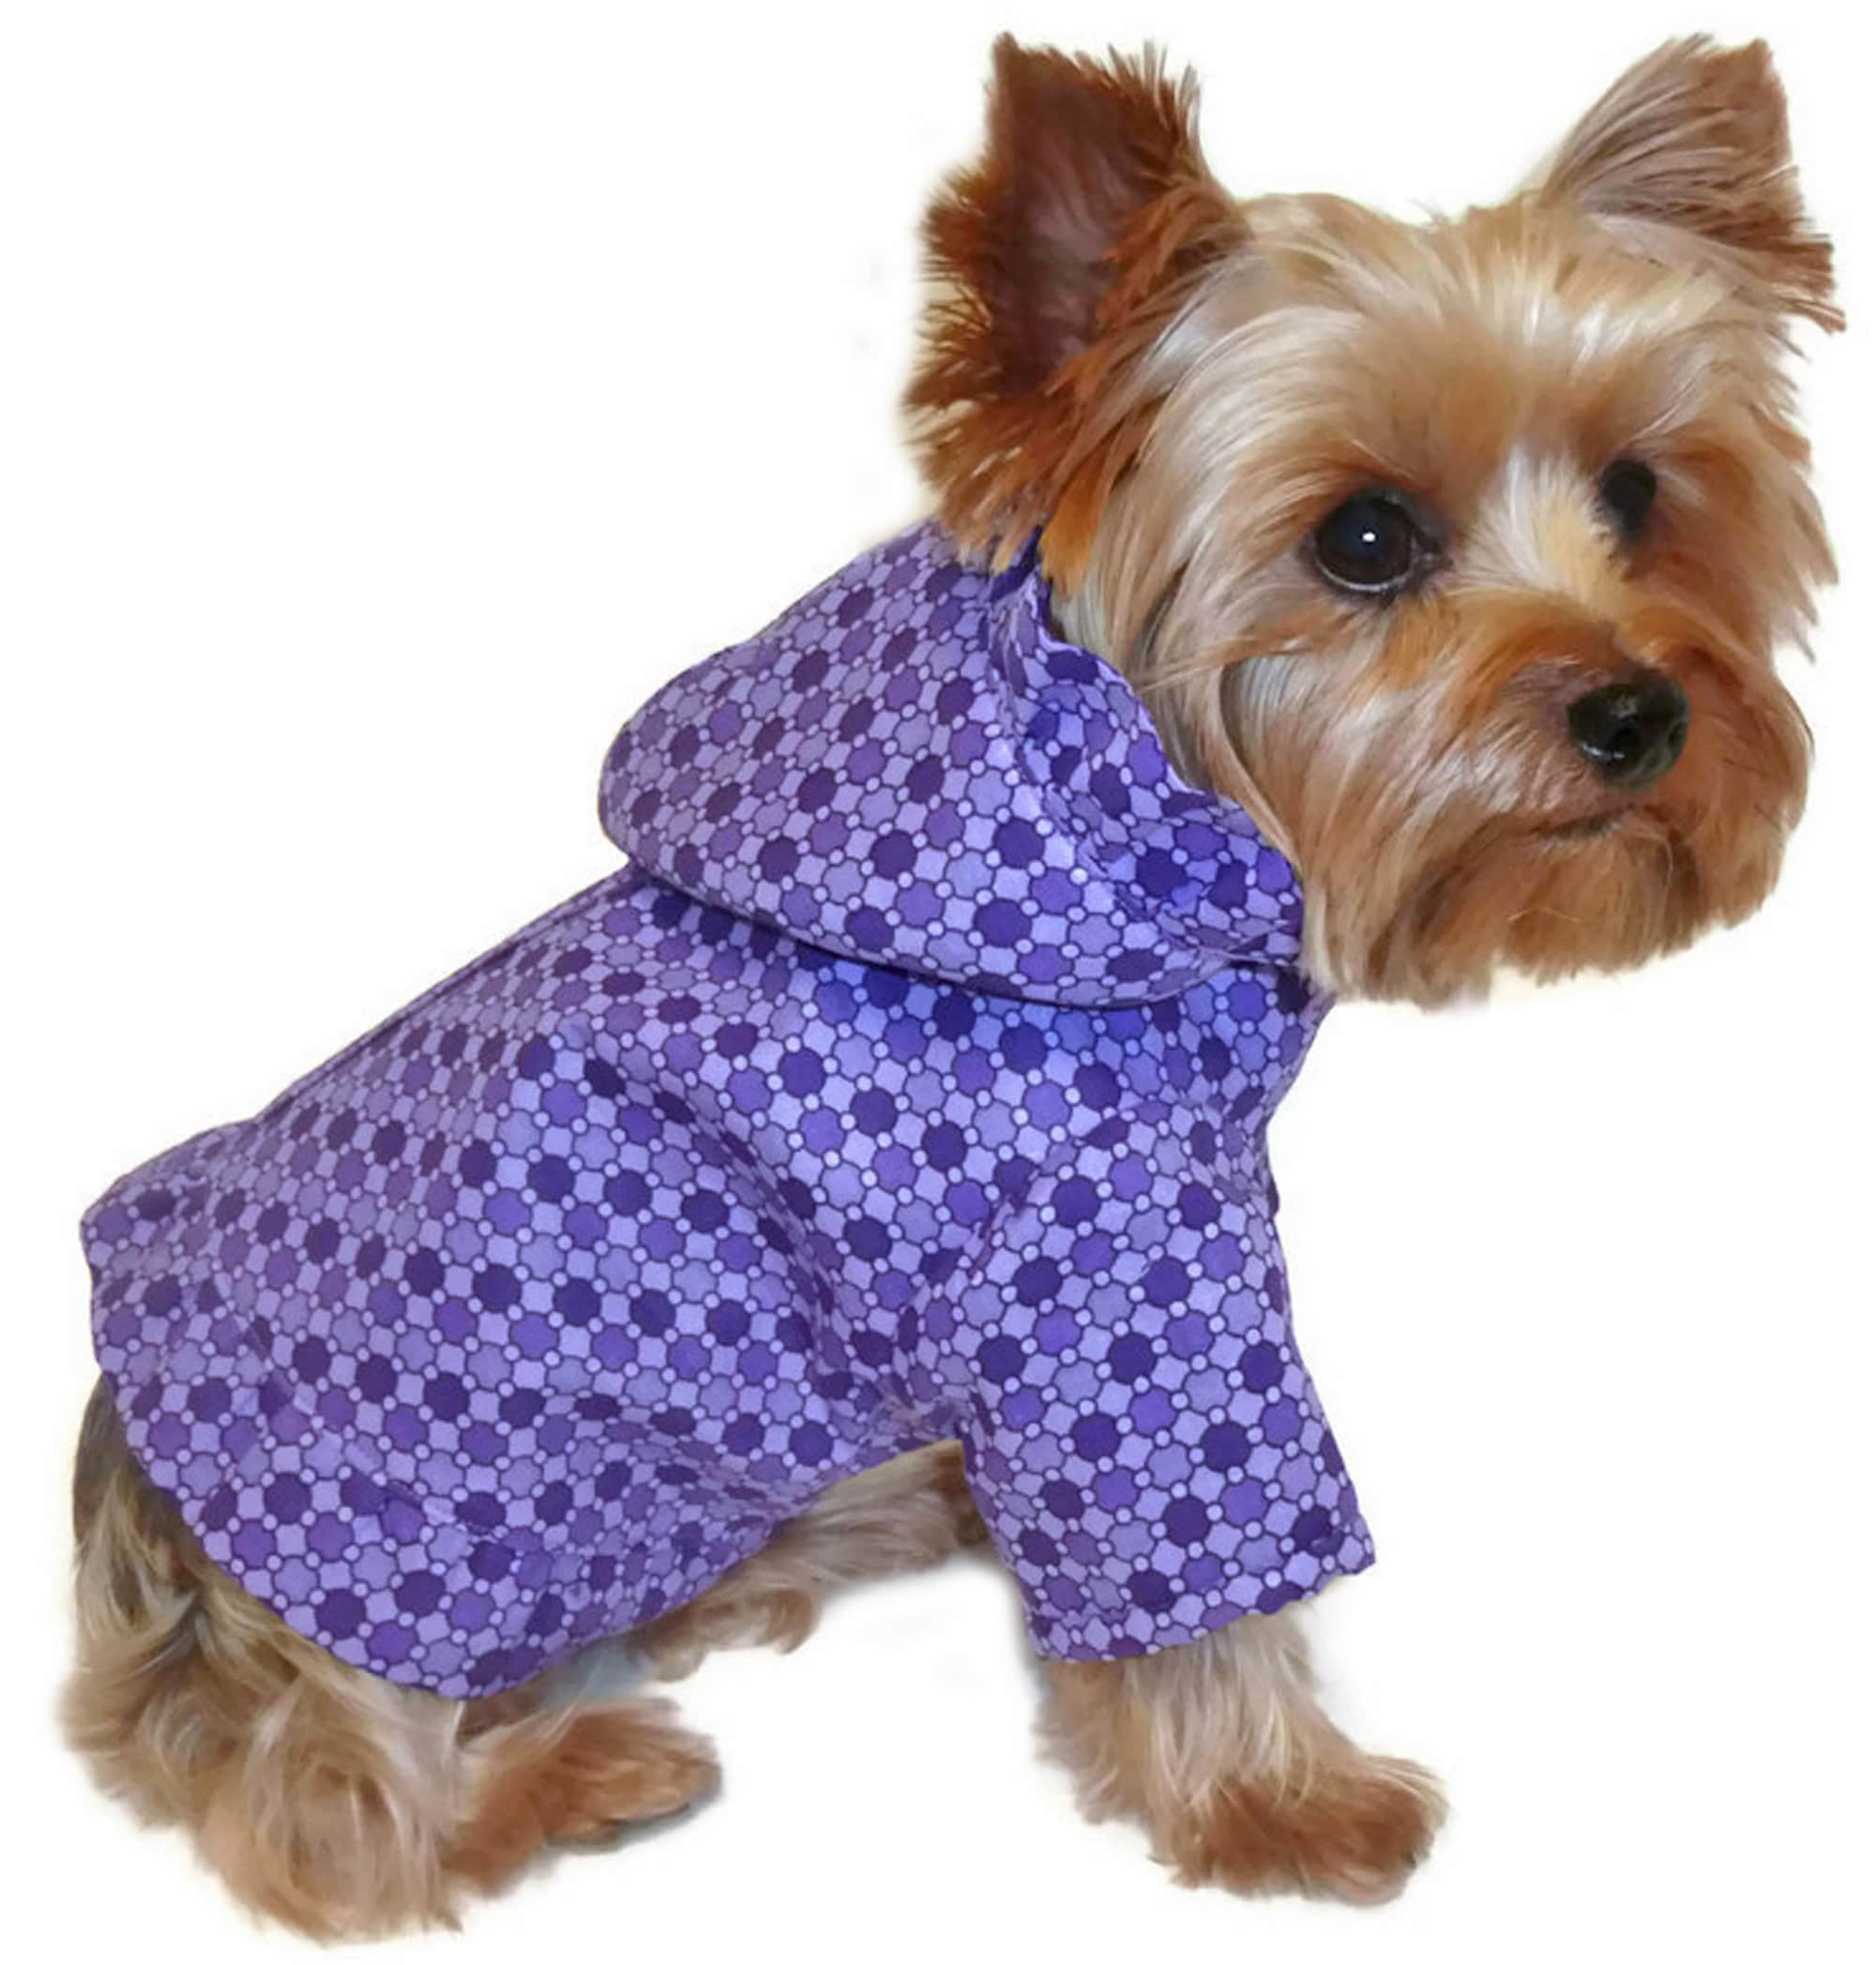 Winter Dog Coat Sewing Pattern 1642 Dog Clothes PDF Sewing